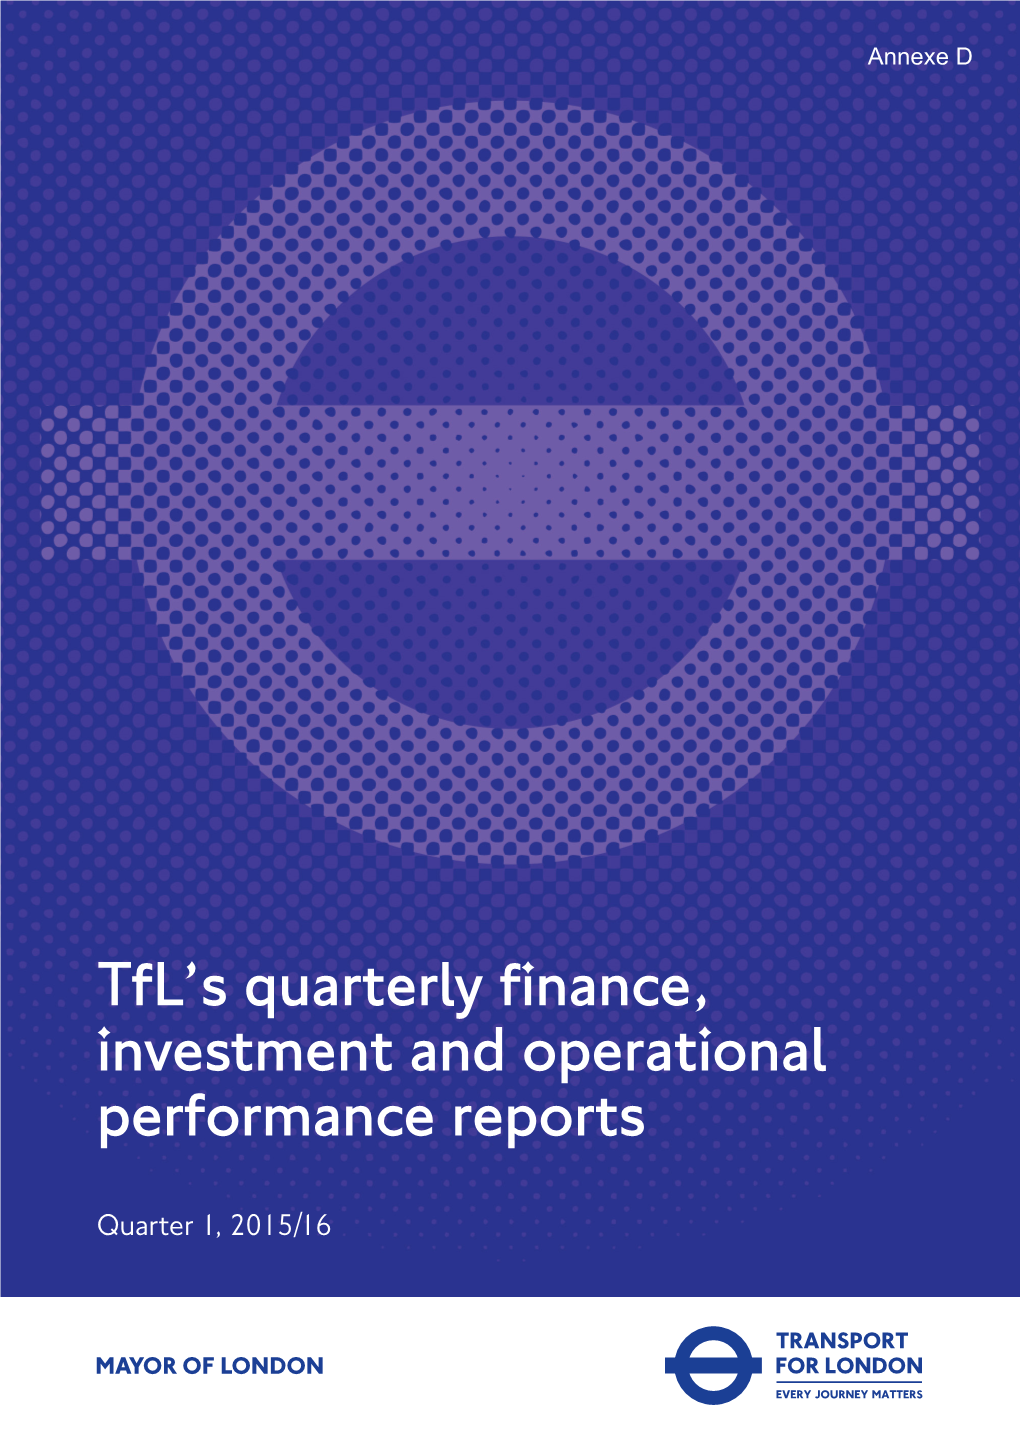 Tfl's Quarterly Finance, Investment and Operational